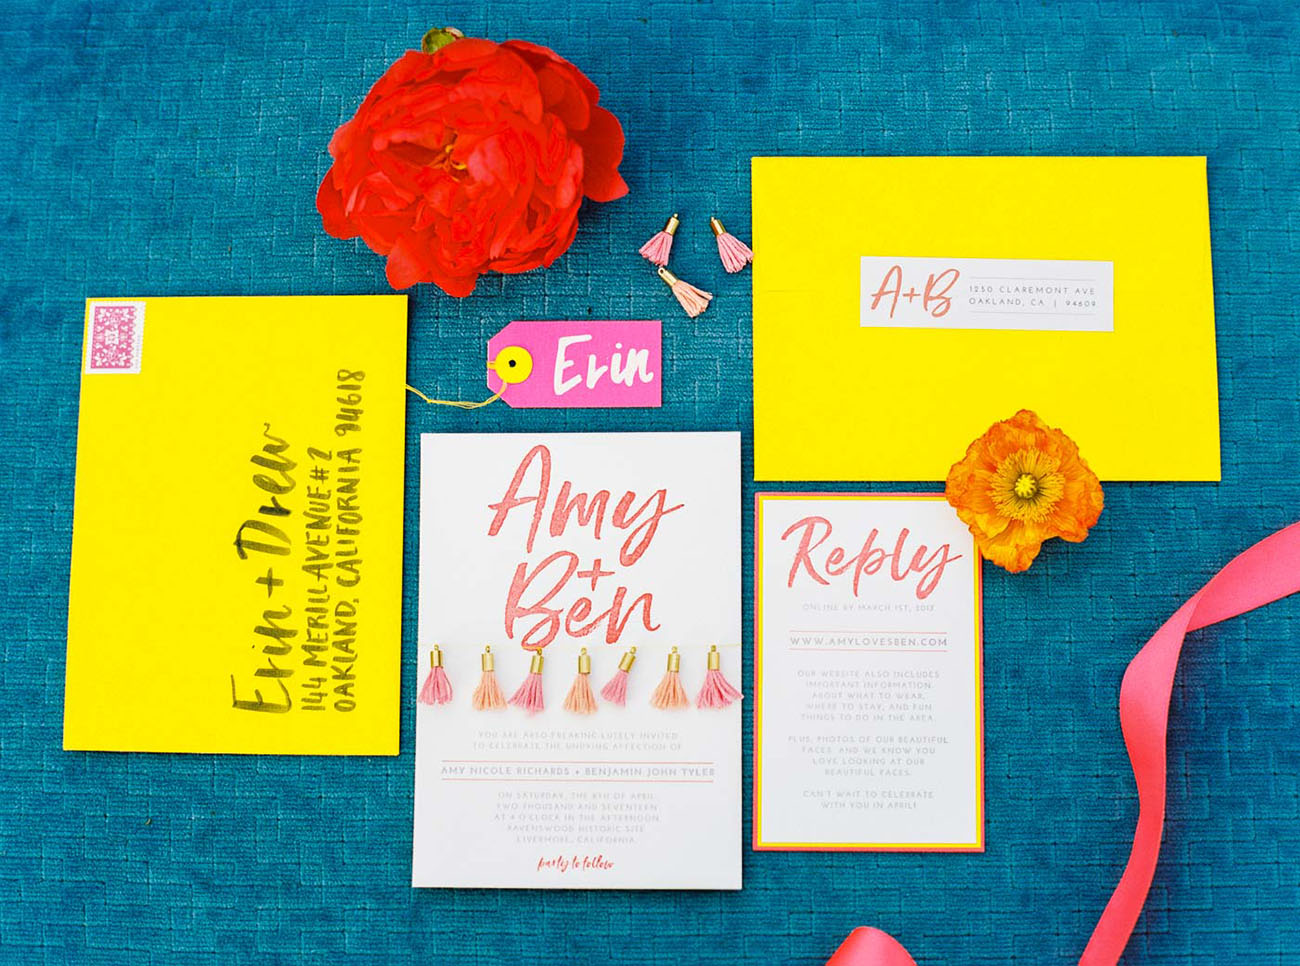 The wedding invites were done in neon yellow and pink, with tassels